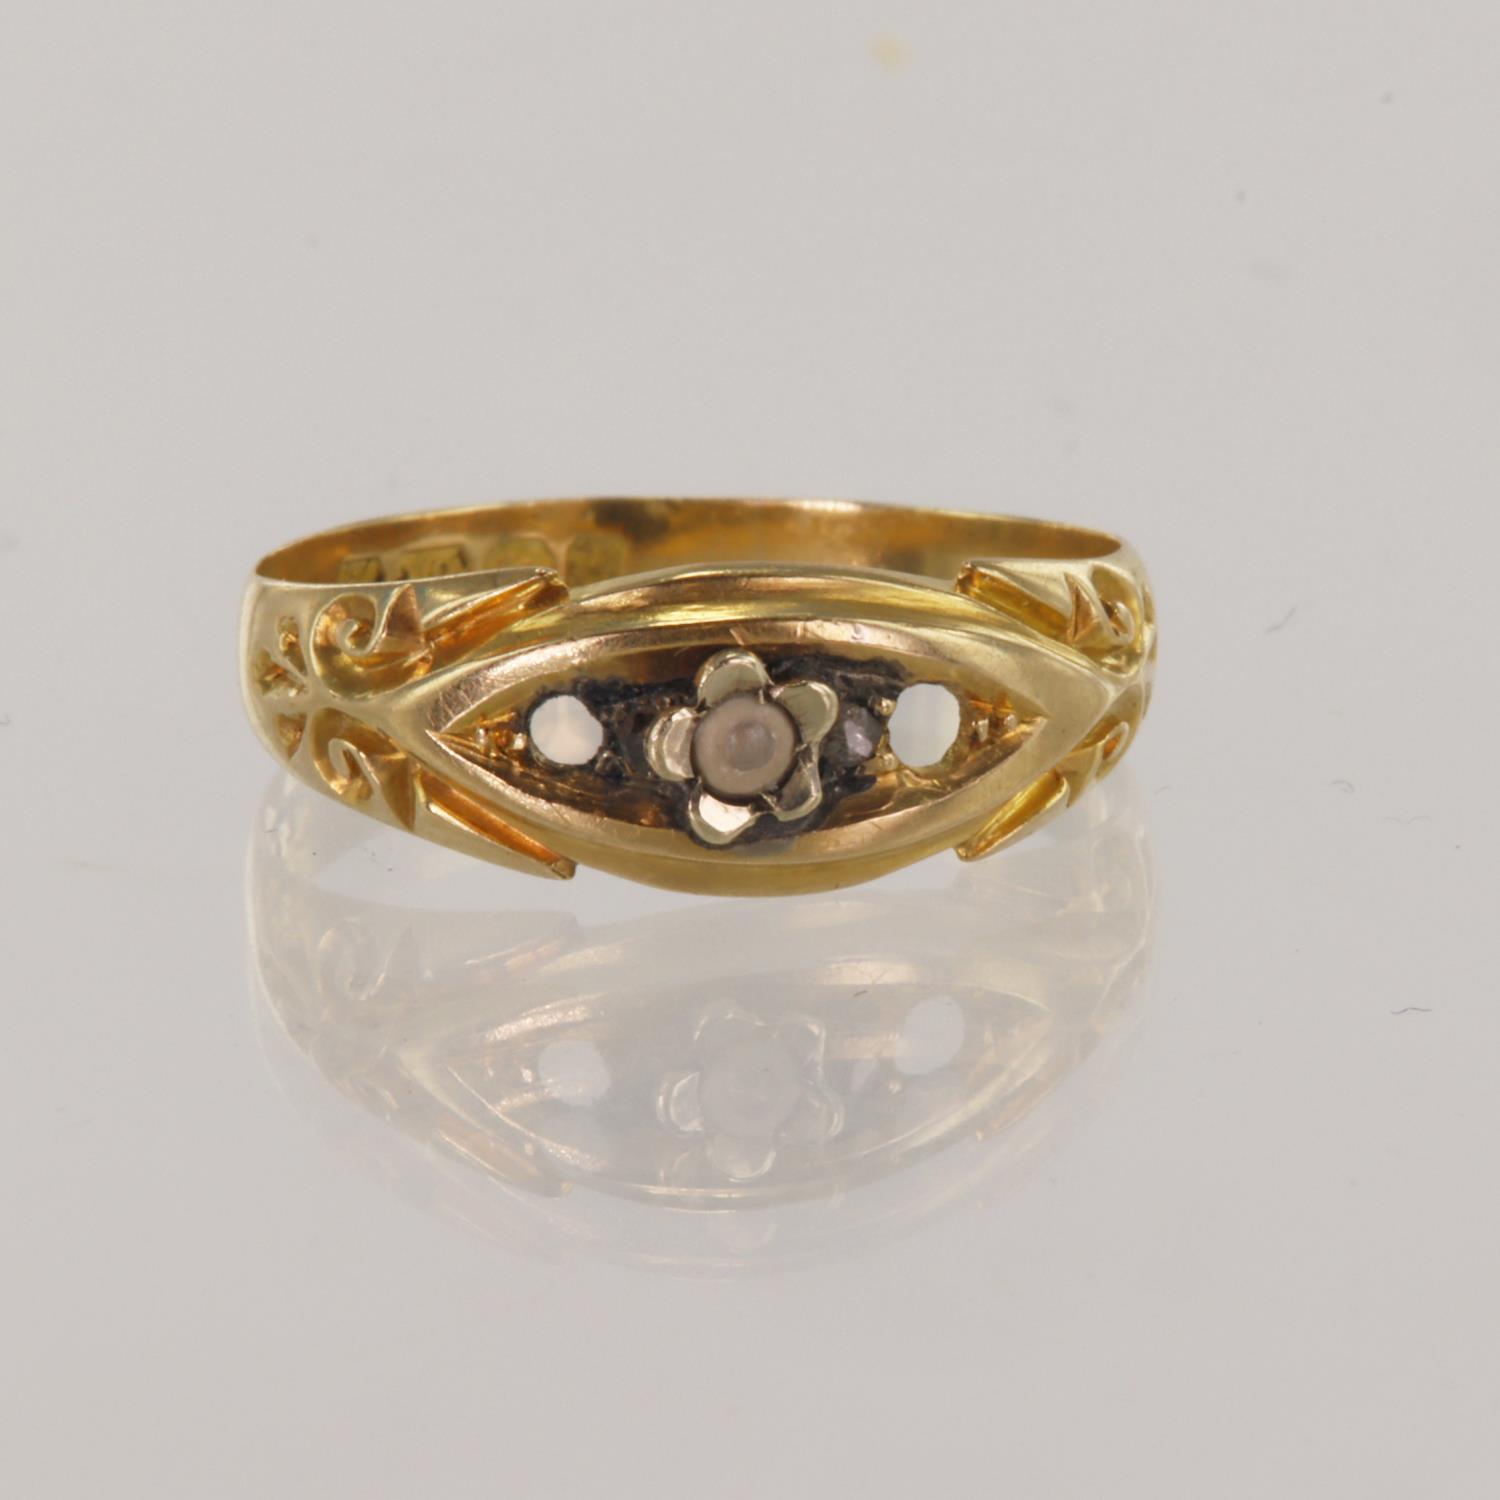 18ct yellow gold Edwardian gypsy ring, centre white metal flower set with a seed pearl, flanked by